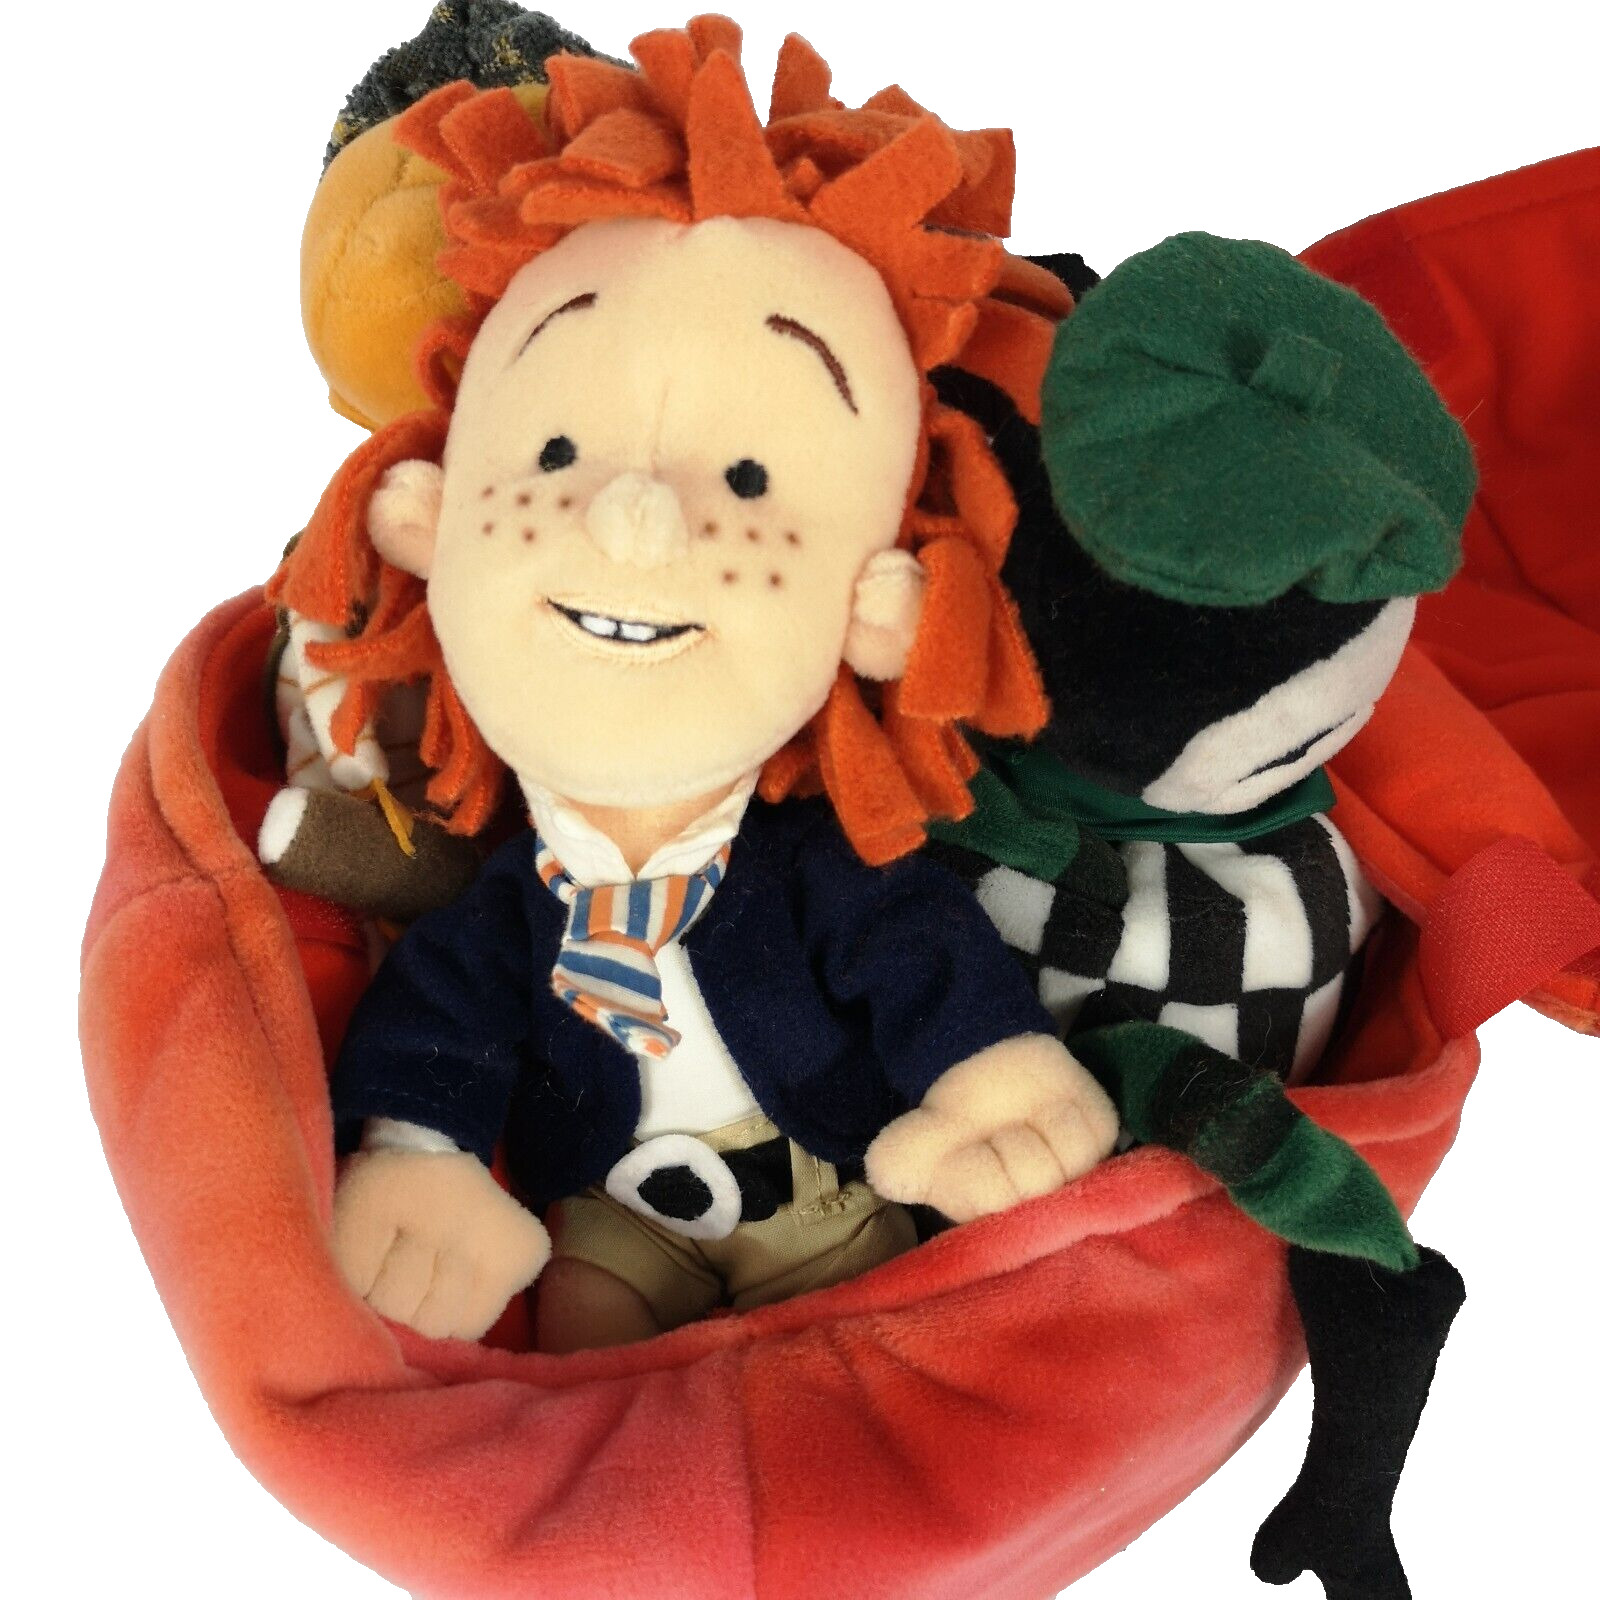 Disney Roald Dahl James and the Giant Peach Plush 4 Characters Complete set 